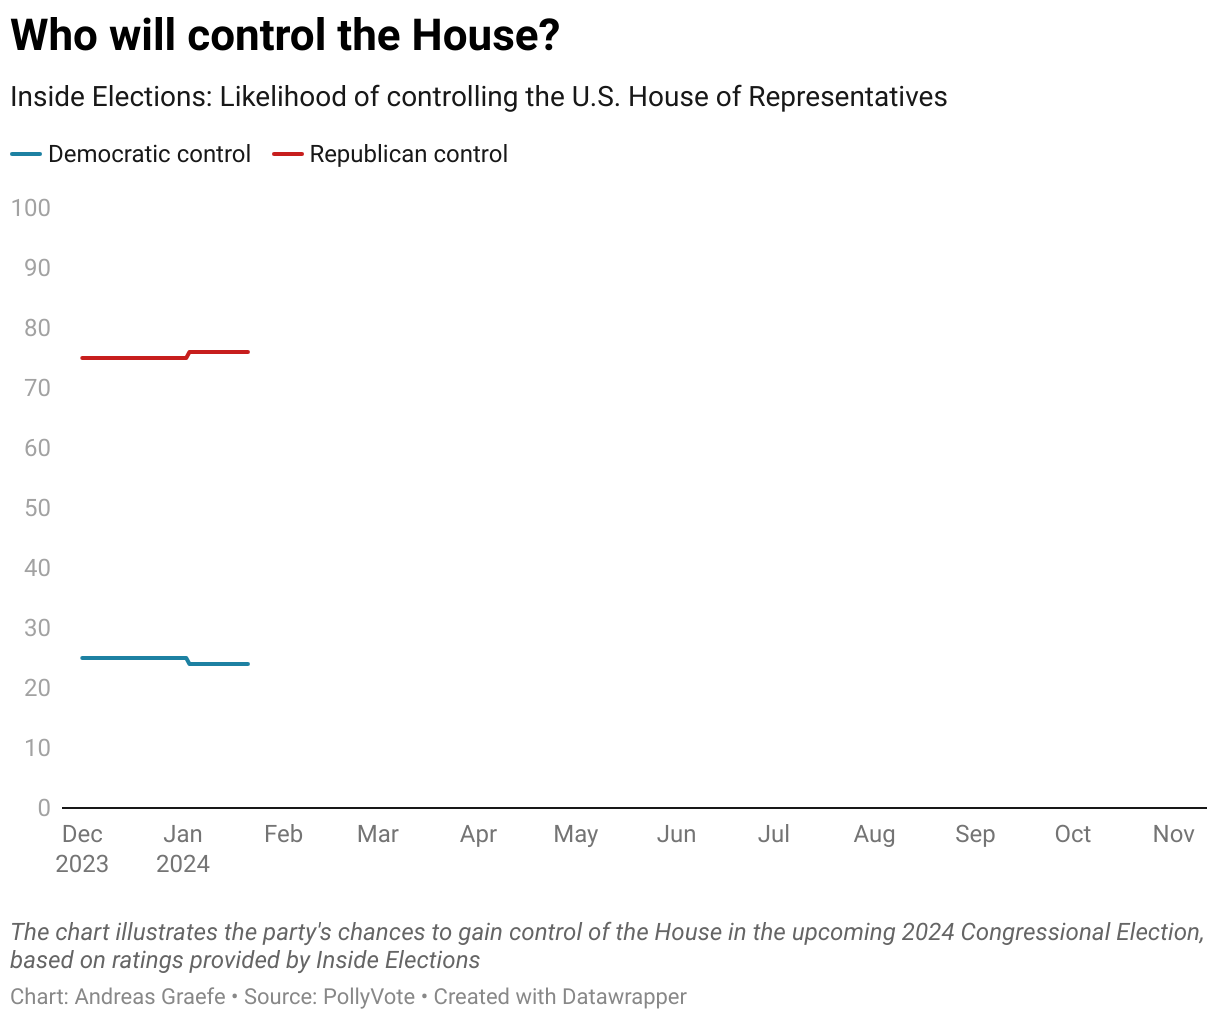 The chart illustrates the party's chances to gain control of the House in the upcoming 2024 Congressional Election, based on ratings provided by Inside Elections